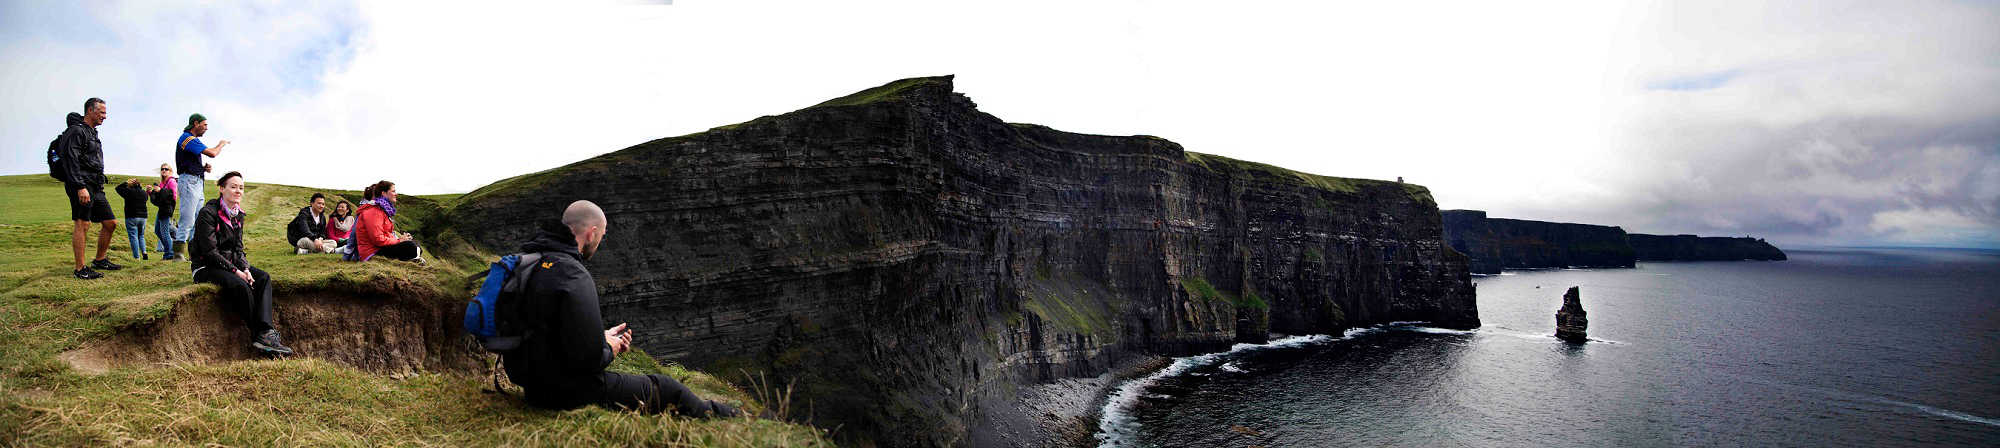 Cliffs of Moher View